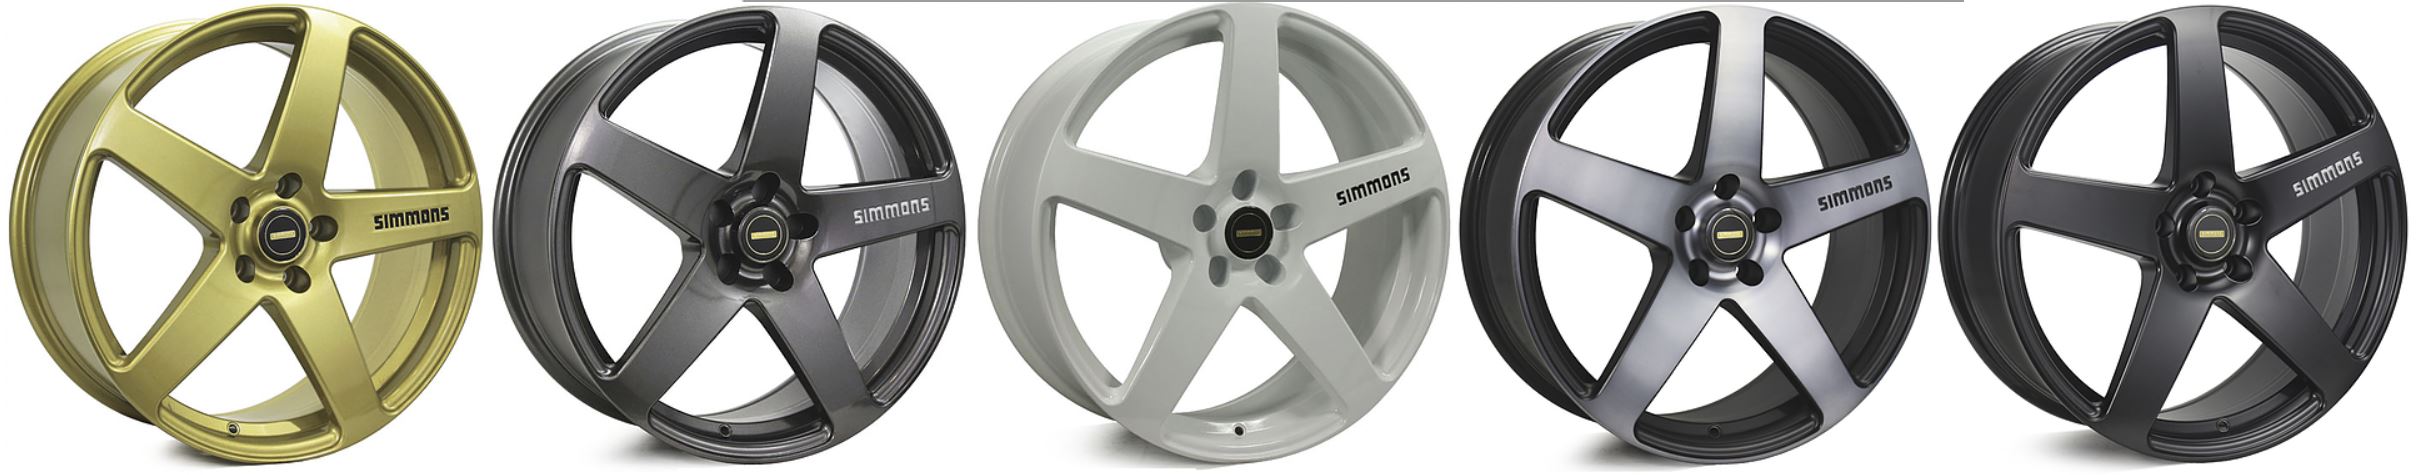 18X8.5 & 18X9.5 SIMMONS FR-1 WHEEL PACKAGE